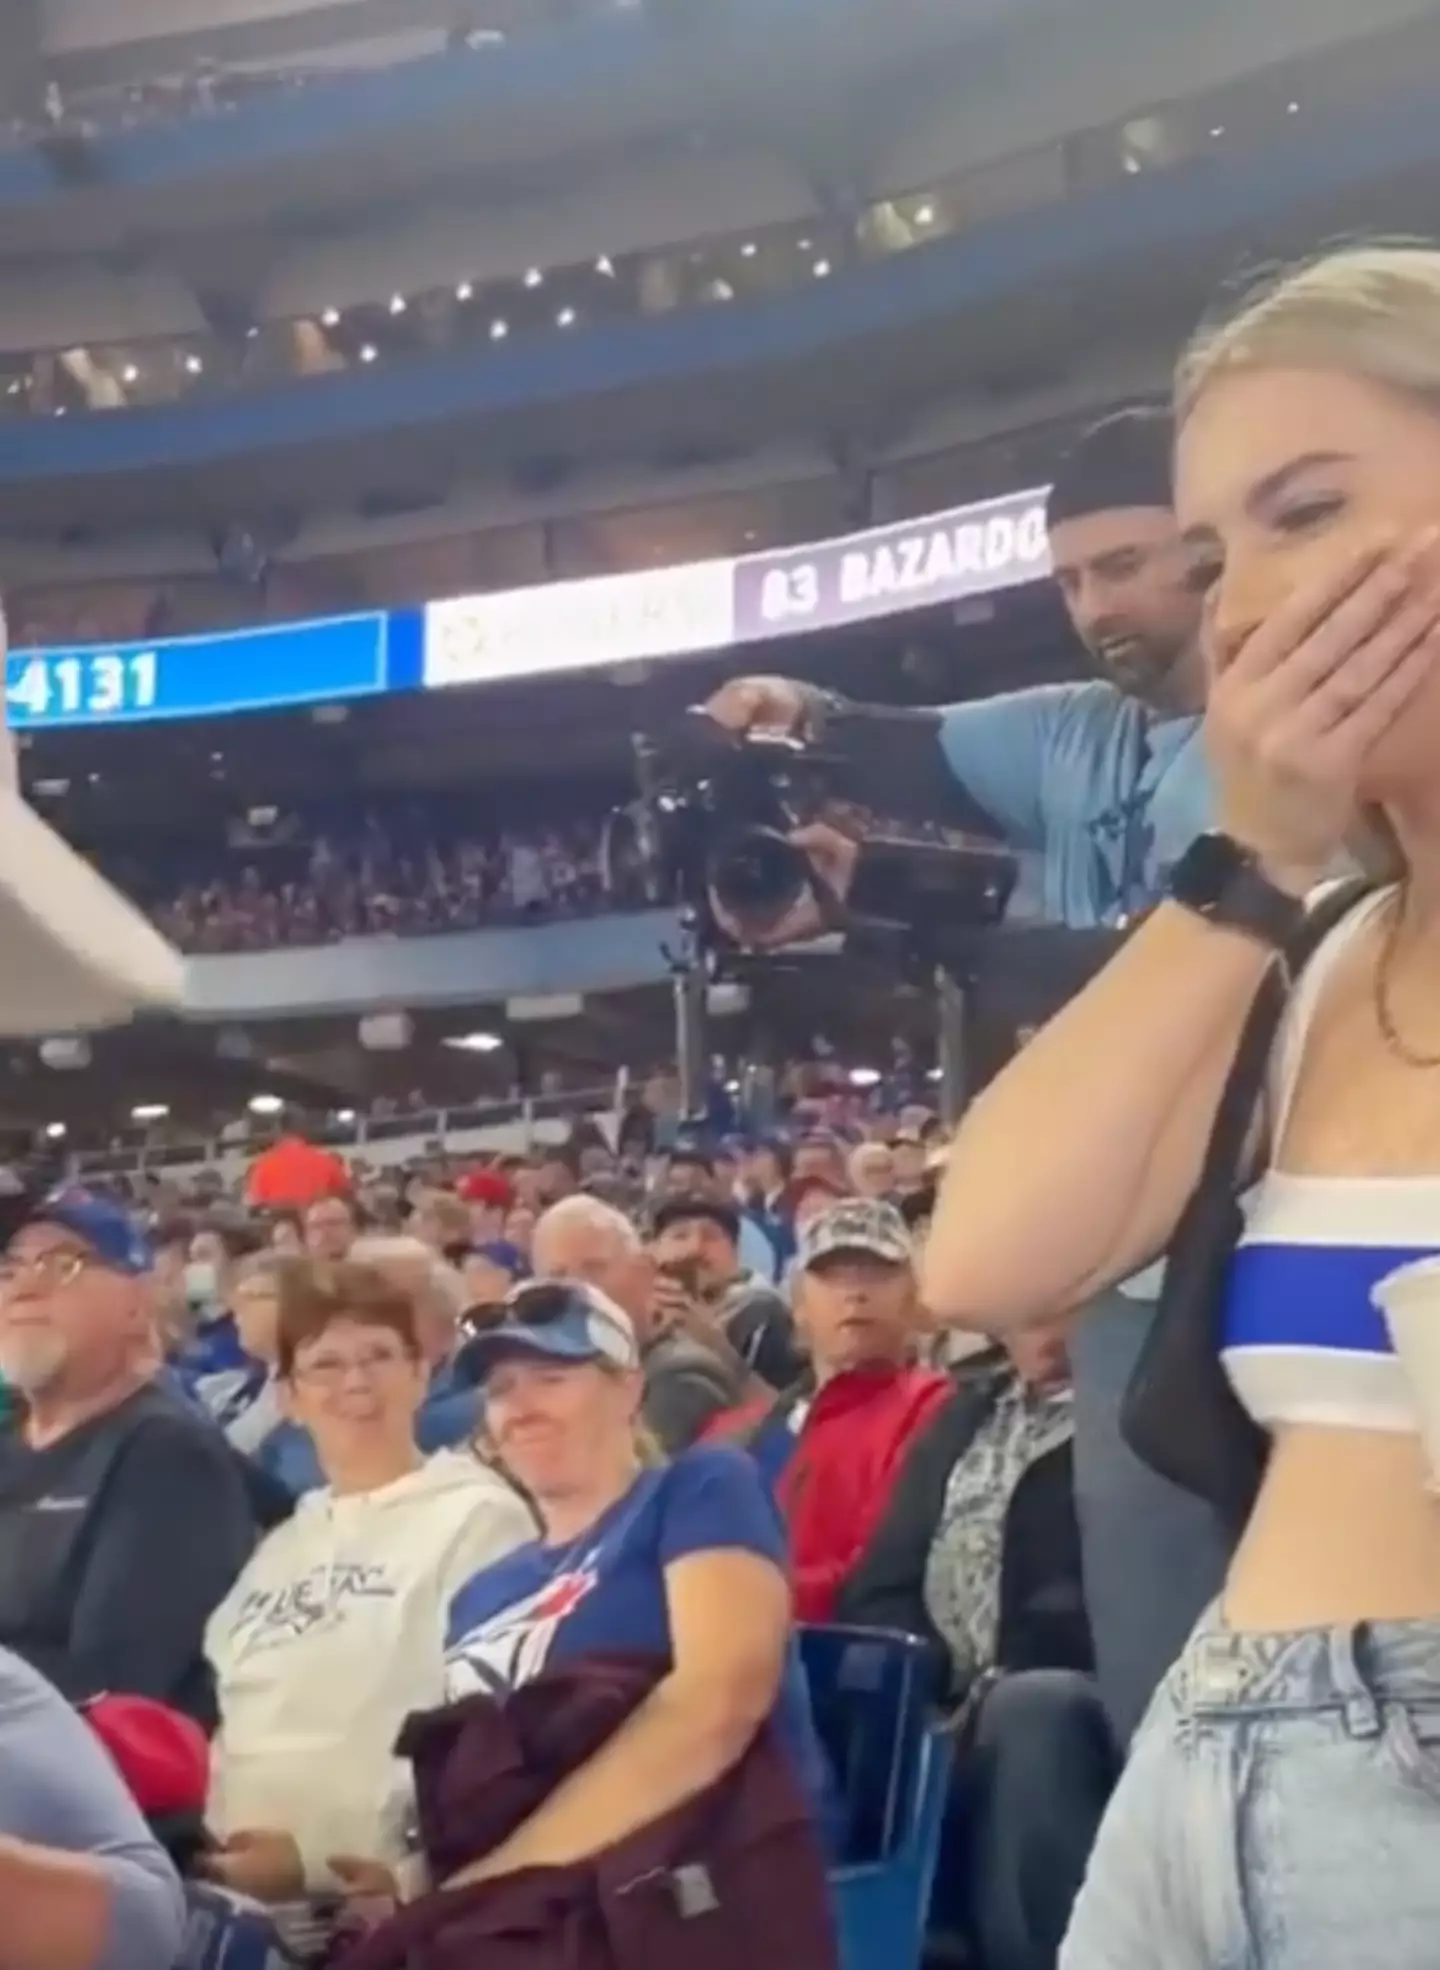 The man proposed at a Toronto Blue Jays vs Boston Red Sox game at the Rogers Centre.